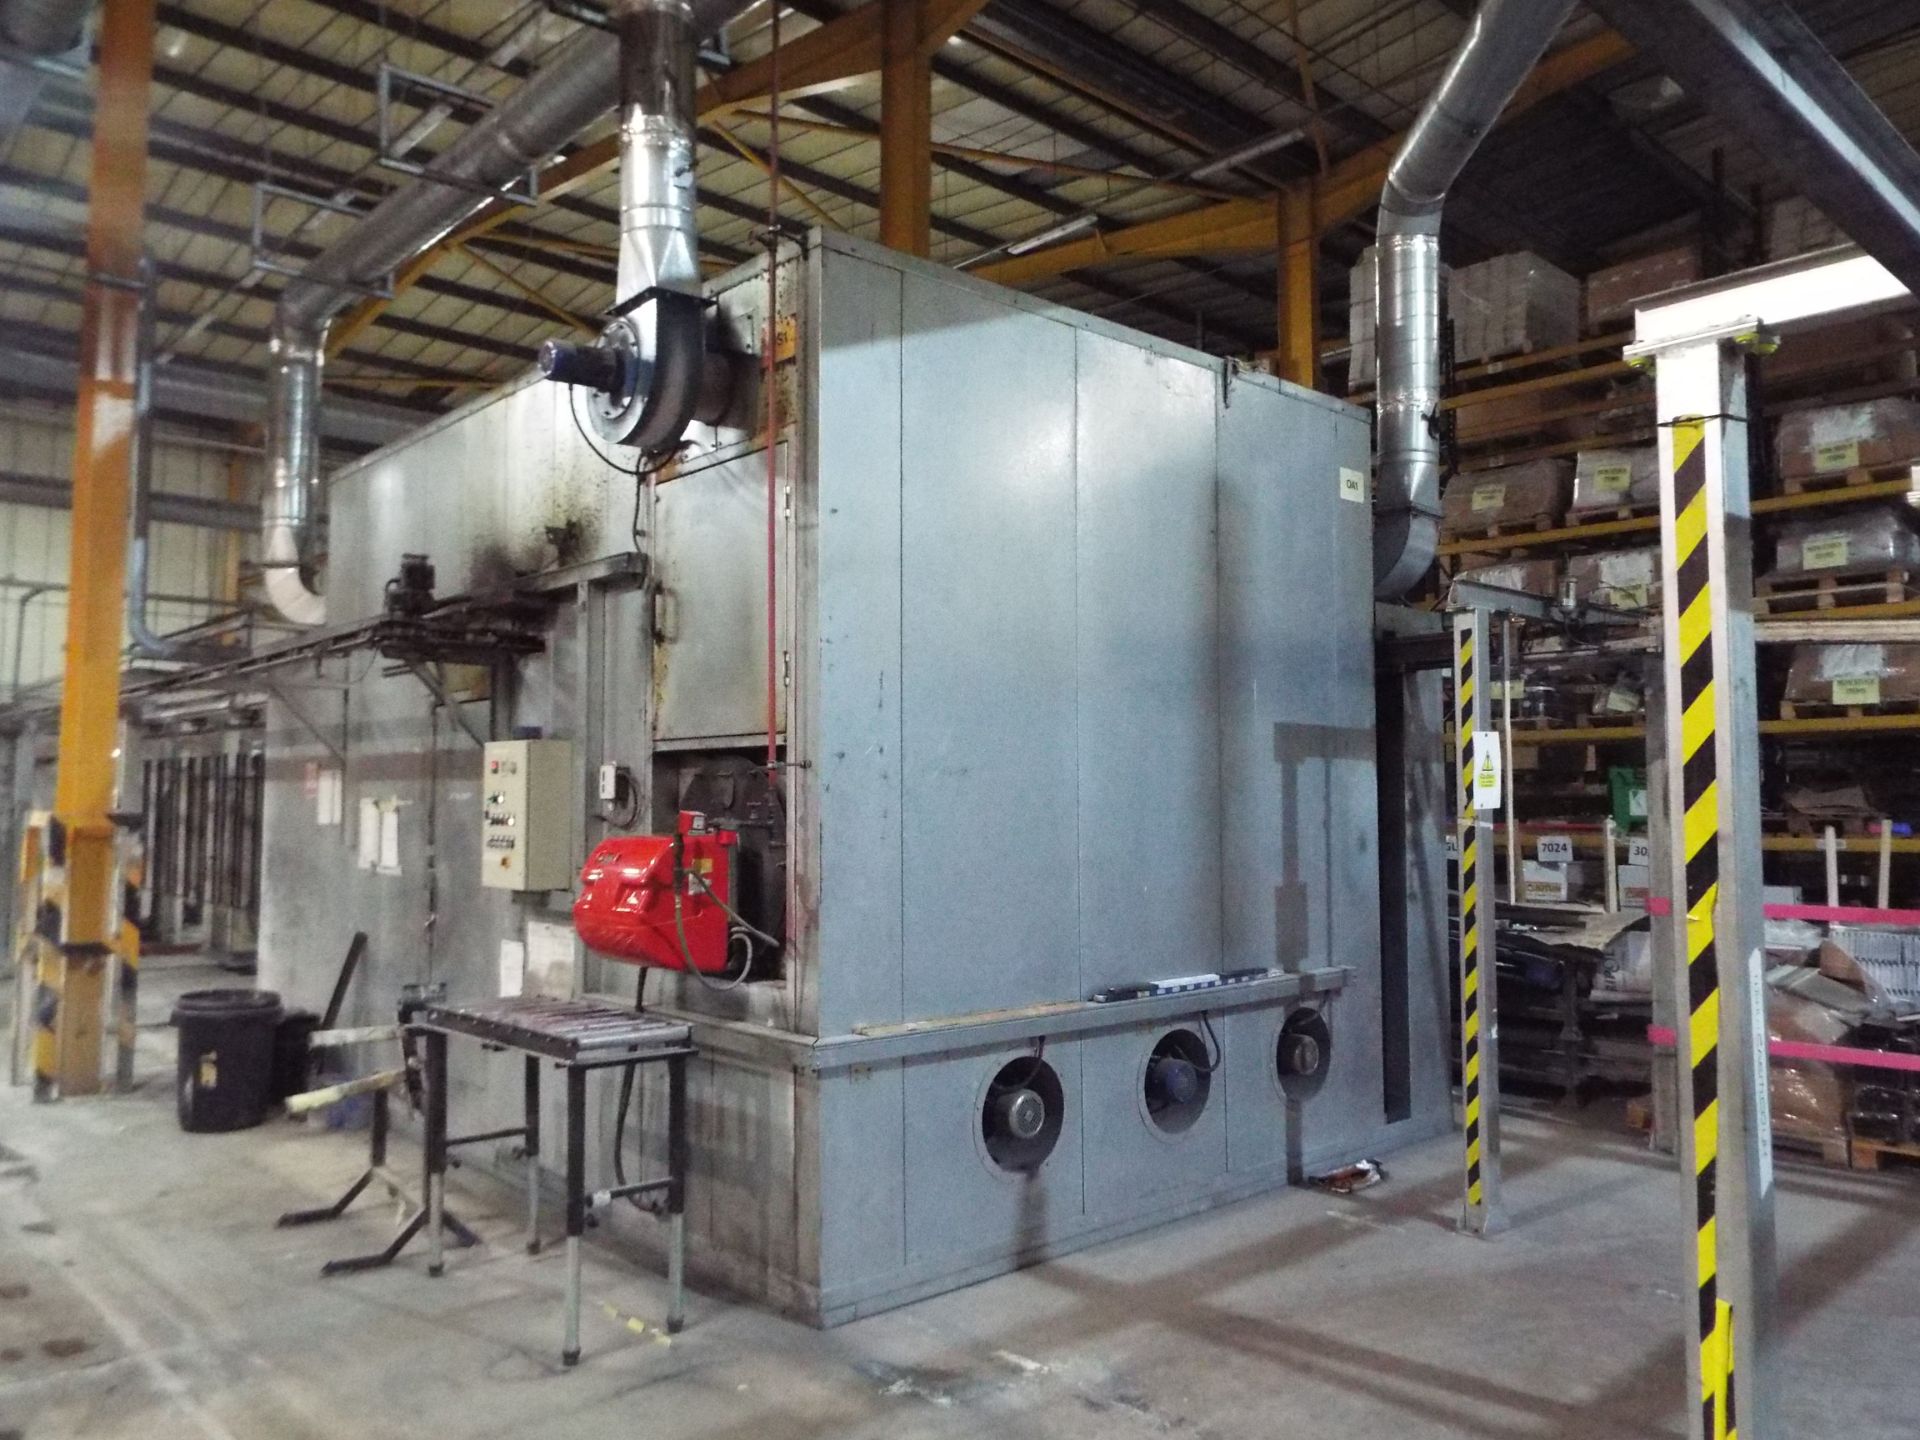 Shuttle Type Fan Assisted Curing Oven & Infeed/Outfeed Overhead Conveyor